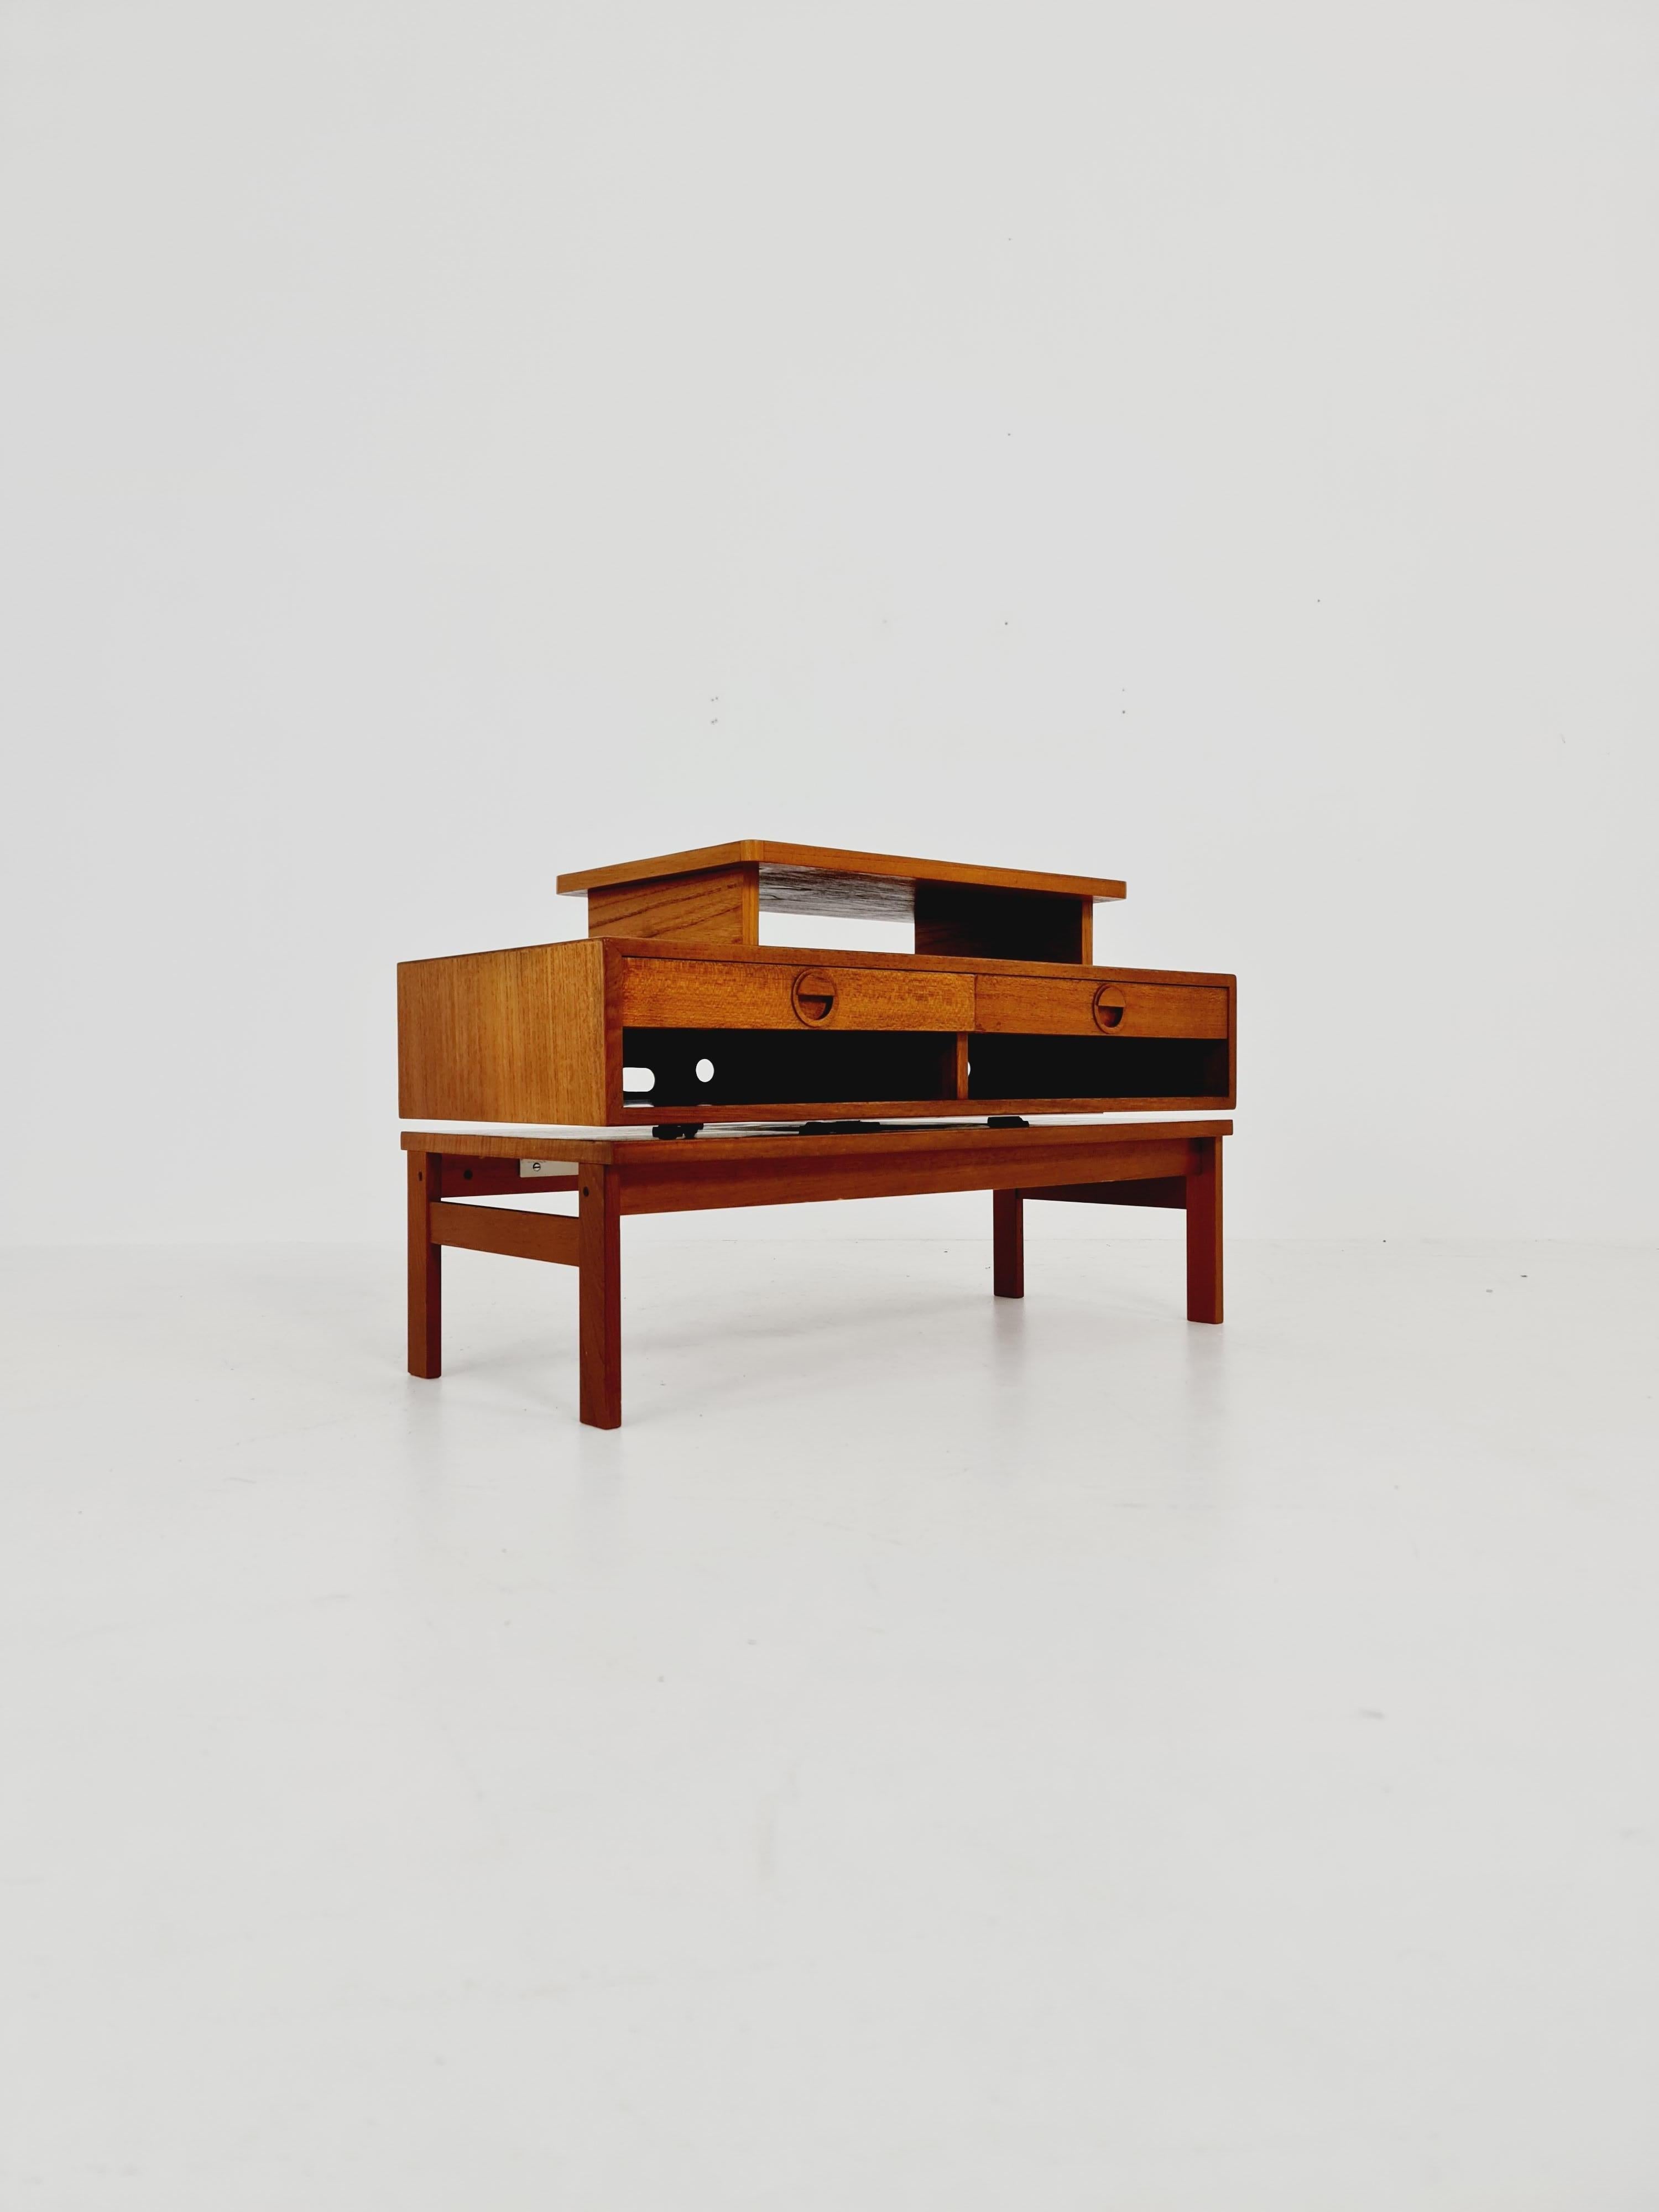 Rare Danish Mid century modern tv-bench hallway table teak by Hansen & Guldborg Møbler, Denmark, 1960s

Made in Denmark

Dimensions: 
49 D x 90 W x 53 H cm

It is in good vintage condition, however, as with all vintage items some minor wear marks